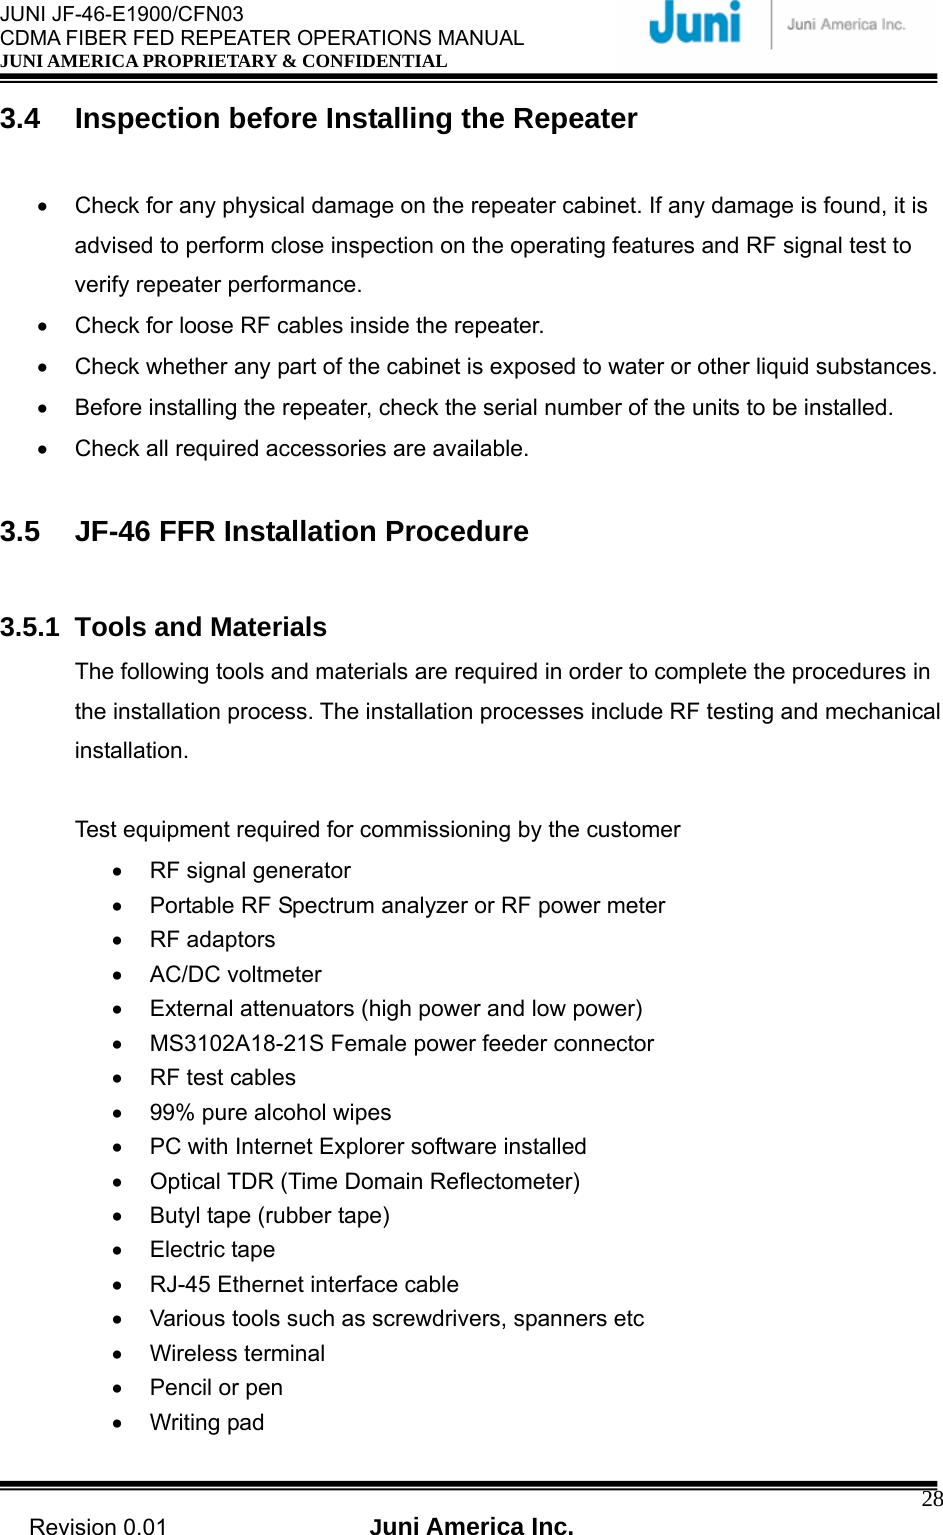  JUNI JF-46-E1900/CFN03 CDMA FIBER FED REPEATER OPERATIONS MANUAL JUNI AMERICA PROPRIETARY &amp; CONFIDENTIAL                                   Revision 0.01  Juni America Inc.  283.4  Inspection before Installing the Repeater  •  Check for any physical damage on the repeater cabinet. If any damage is found, it is advised to perform close inspection on the operating features and RF signal test to verify repeater performance. •  Check for loose RF cables inside the repeater. •  Check whether any part of the cabinet is exposed to water or other liquid substances. •  Before installing the repeater, check the serial number of the units to be installed. •  Check all required accessories are available.  3.5  JF-46 FFR Installation Procedure  3.5.1 Tools and Materials The following tools and materials are required in order to complete the procedures in the installation process. The installation processes include RF testing and mechanical installation.  Test equipment required for commissioning by the customer •  RF signal generator •  Portable RF Spectrum analyzer or RF power meter • RF adaptors • AC/DC voltmeter •  External attenuators (high power and low power) •  MS3102A18-21S Female power feeder connector   •  RF test cables •  99% pure alcohol wipes •  PC with Internet Explorer software installed •  Optical TDR (Time Domain Reflectometer) •  Butyl tape (rubber tape) • Electric tape •  RJ-45 Ethernet interface cable •  Various tools such as screwdrivers, spanners etc • Wireless terminal •  Pencil or pen • Writing pad 